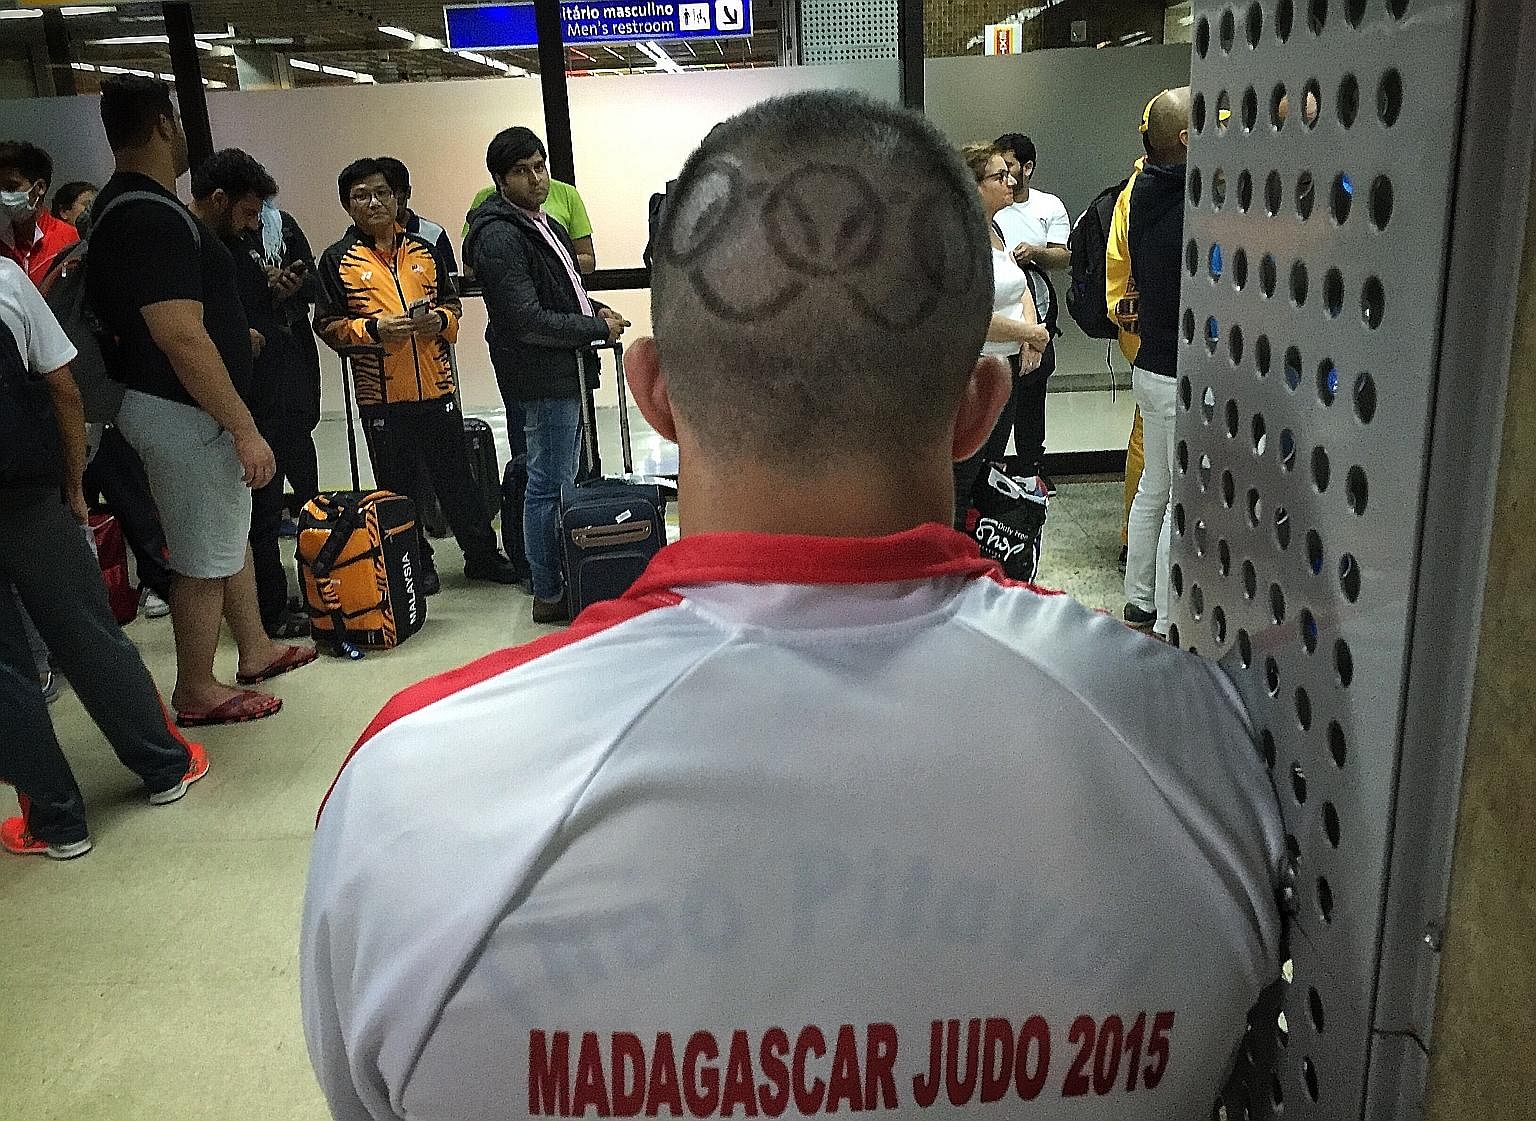 A Rio-bound Madagascar judo coach sports a haircut showing the Olympic logo as he waits in the boarding lounge at the Sao Paulo-Guarulhos International Airport.